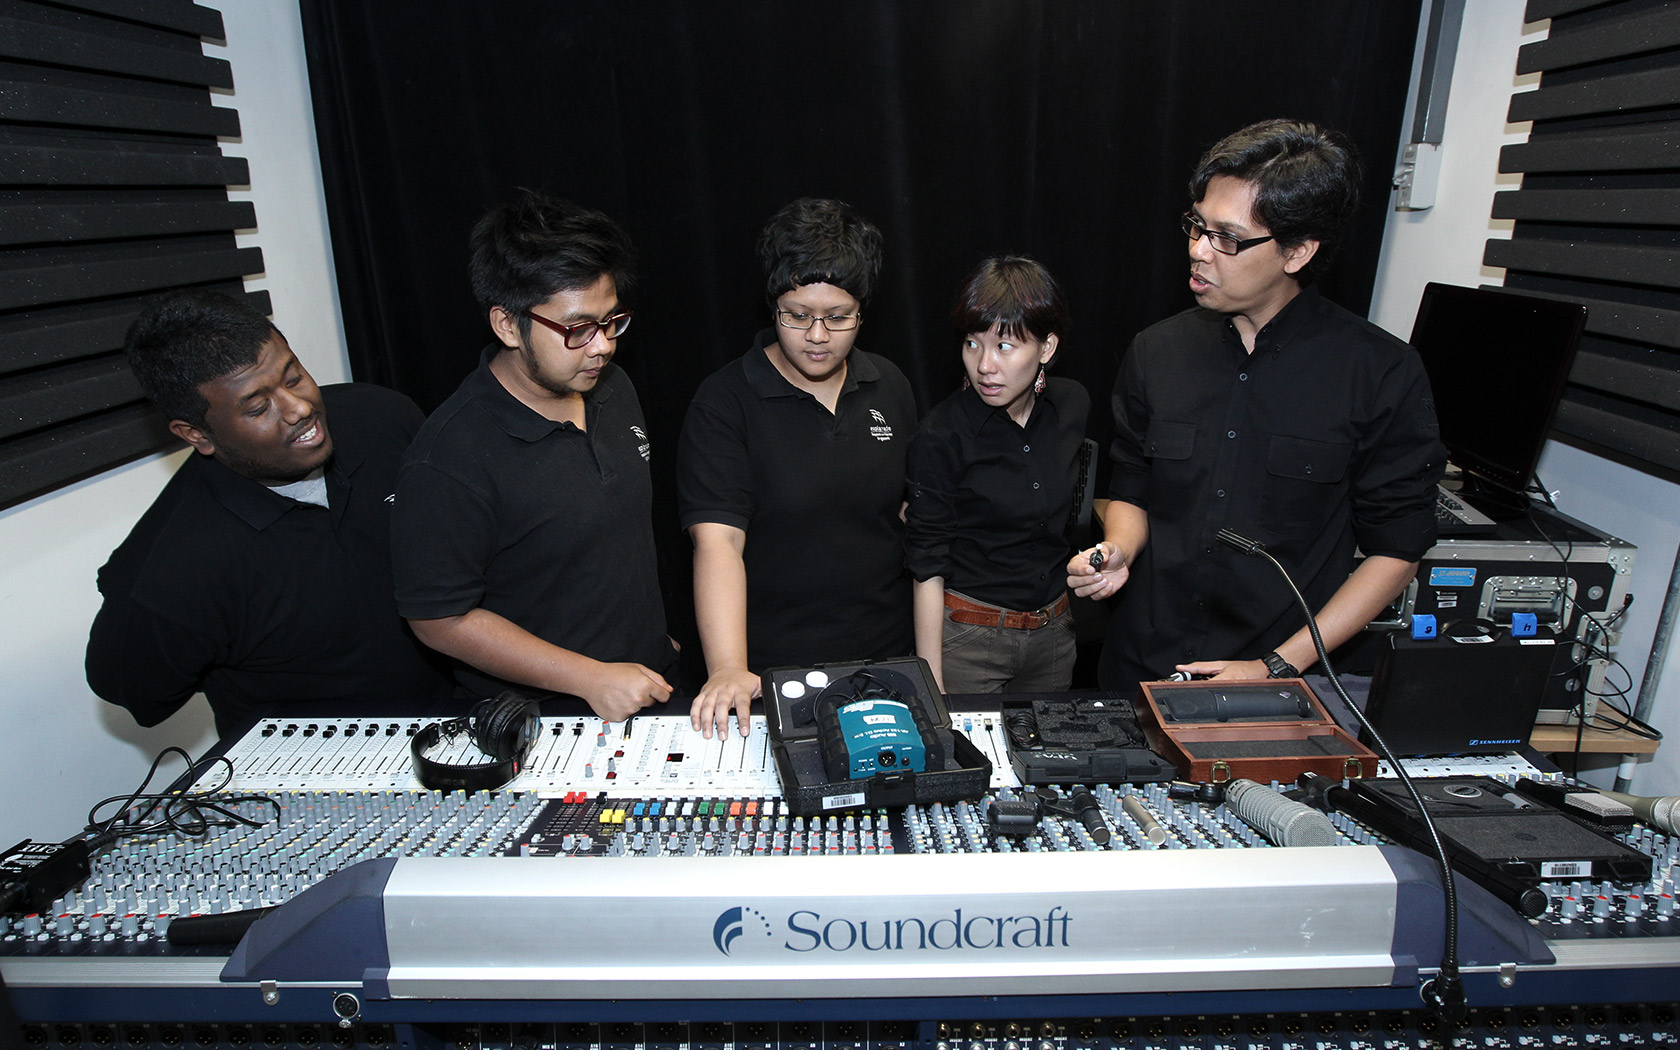 An image of a group of people standing behind a sound console.